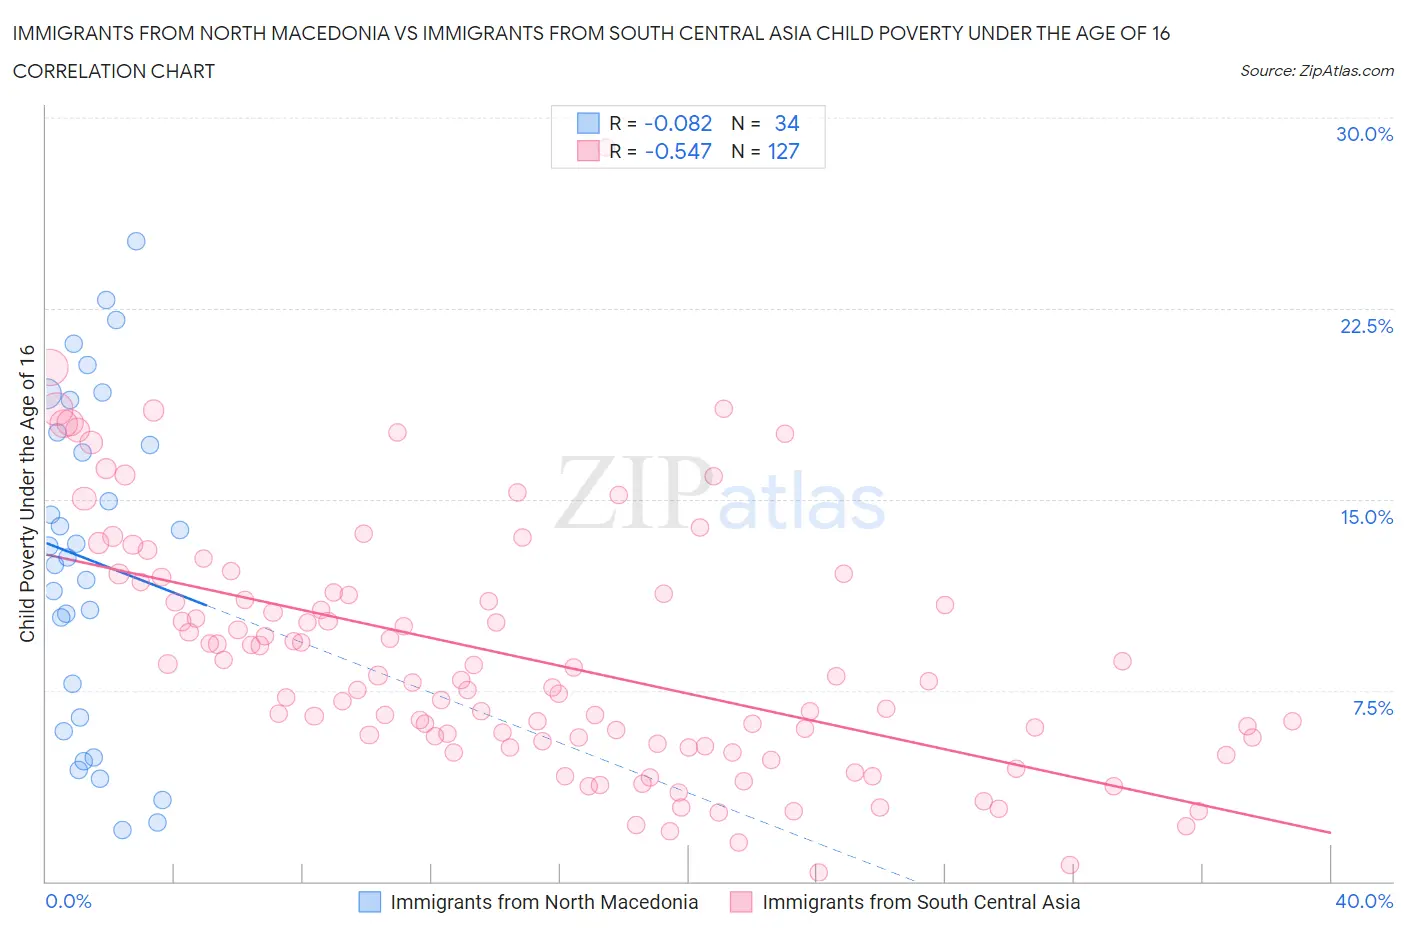 Immigrants from North Macedonia vs Immigrants from South Central Asia Child Poverty Under the Age of 16